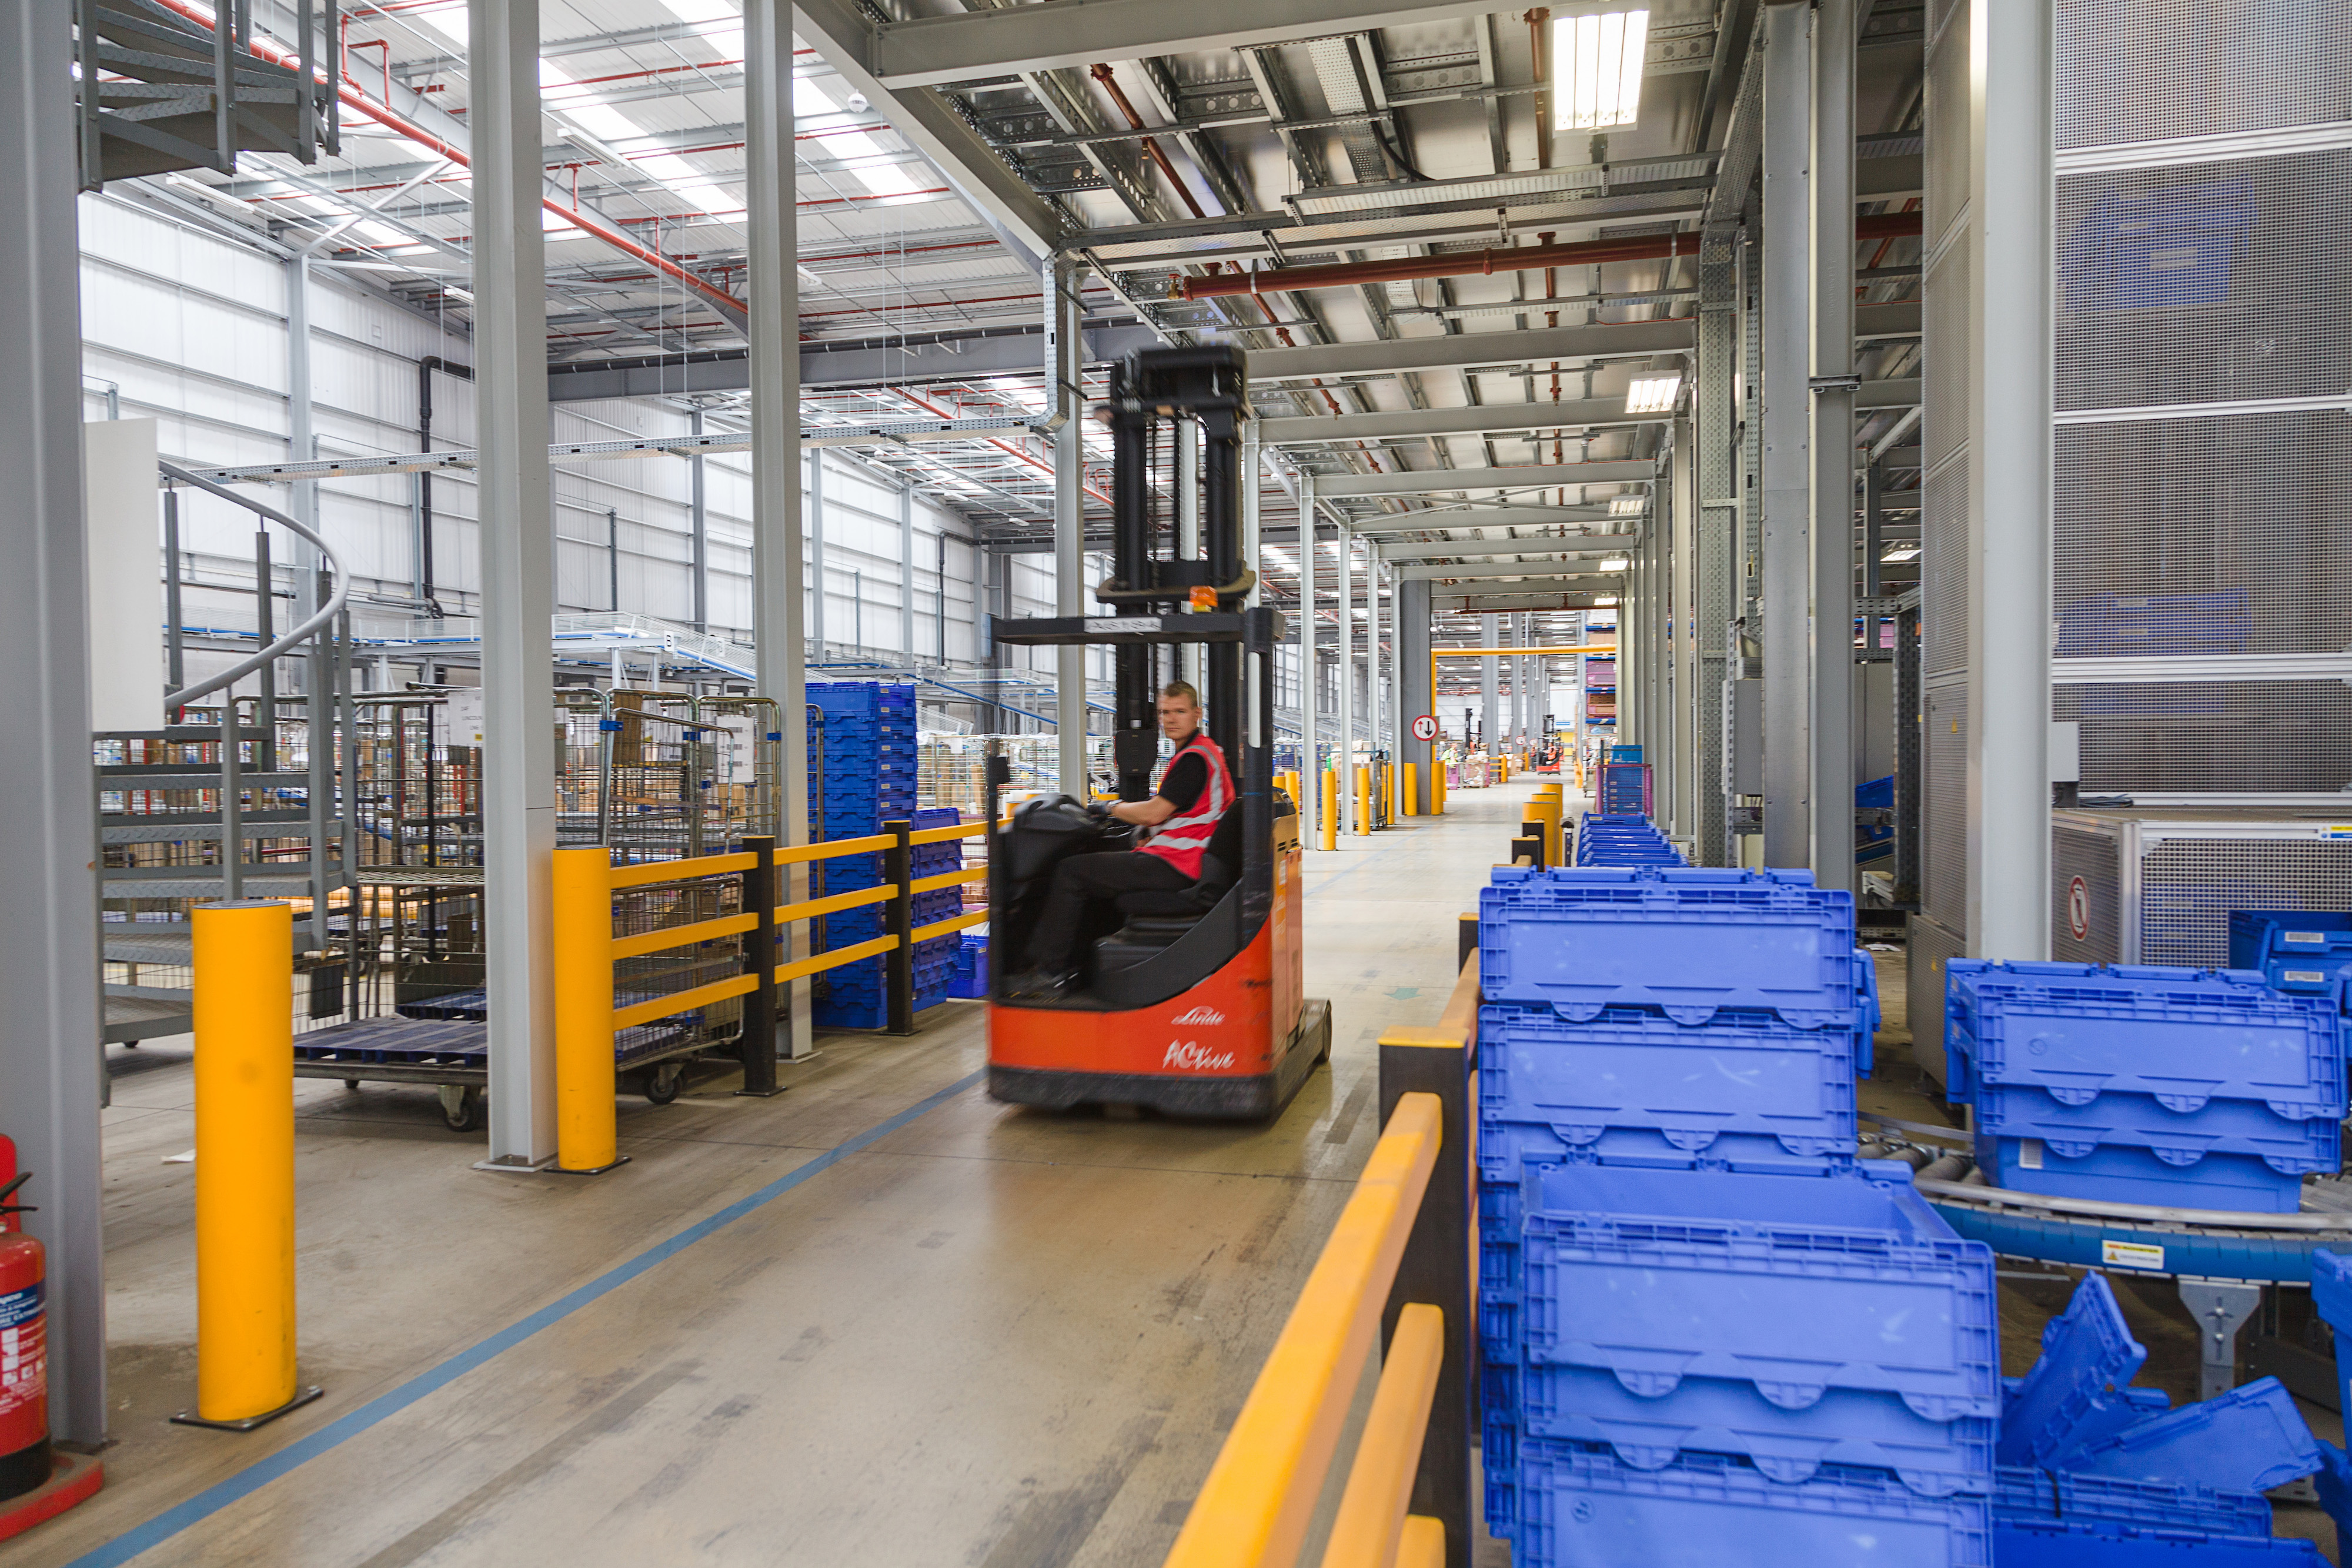 Interior photo of Prologis North Hampton Pineham DC1, showing spiral meatal stairs on the left, blue boxes and yellow bumper guards, and a person driving a red forklift